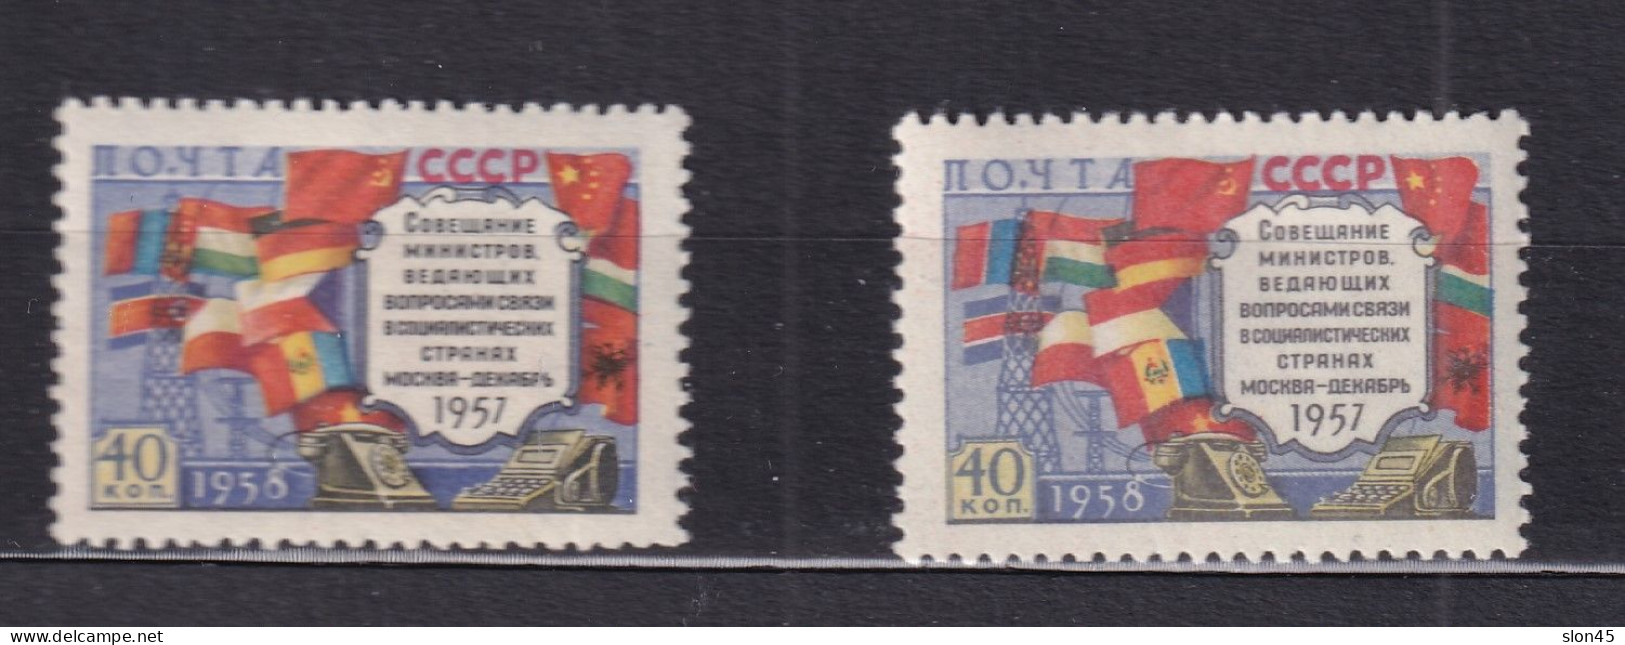 Russia 1958 Telecommunication Moscow Both Types CSSR Flag MH  16019 - Unused Stamps